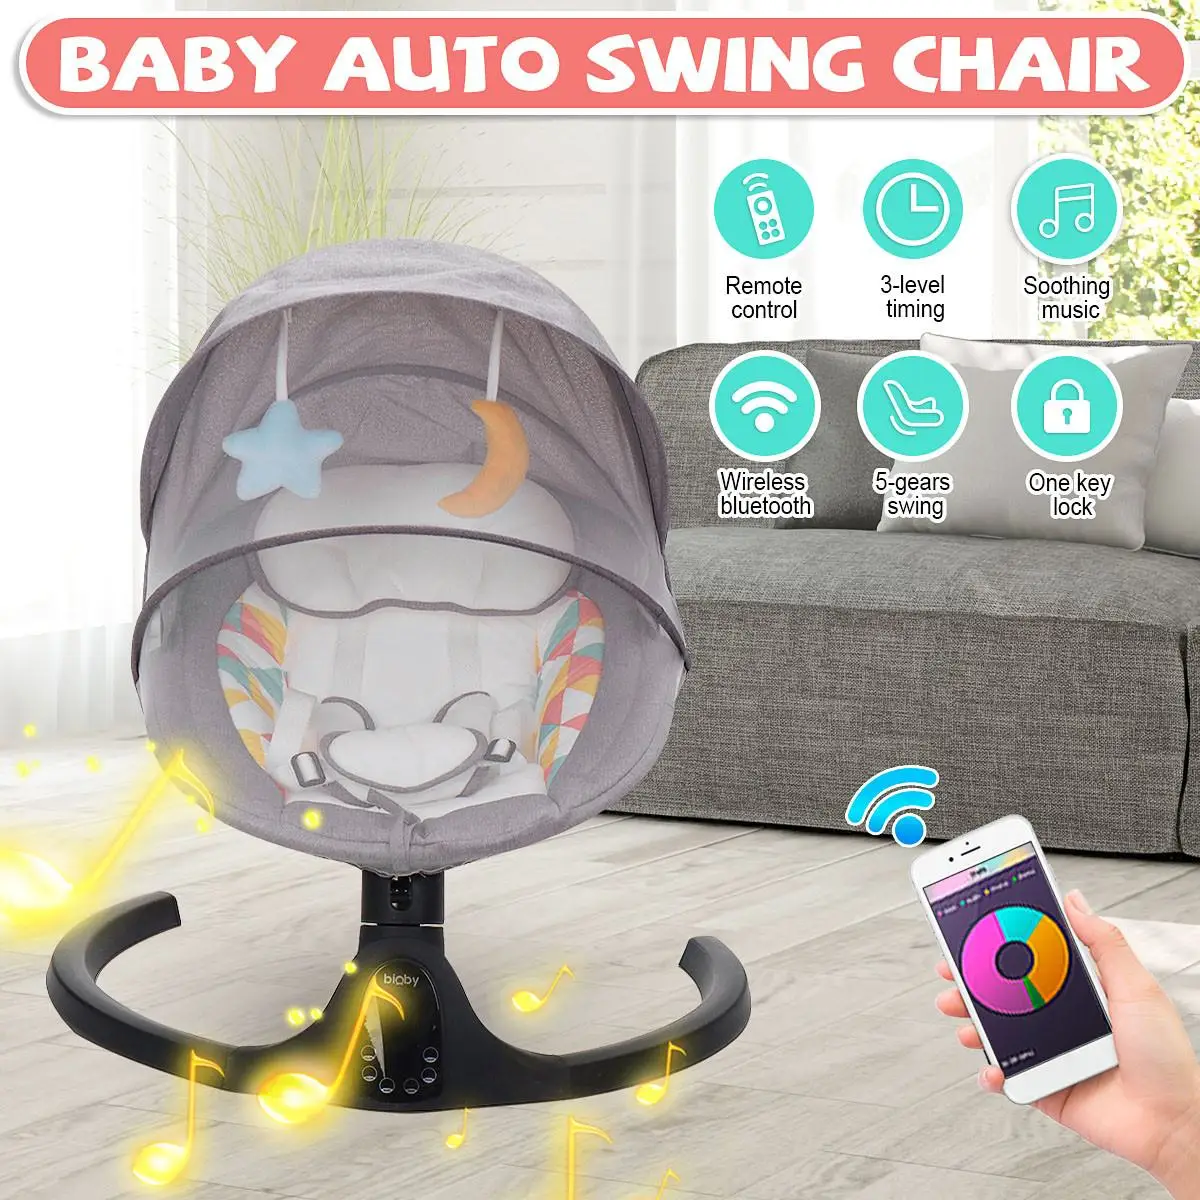 Baby Electric Rocking Chair Baby Auto Swing Cradle Crib Baby Bouncer Newborn Music Sleeping Calm Chair with Toys Remote Control